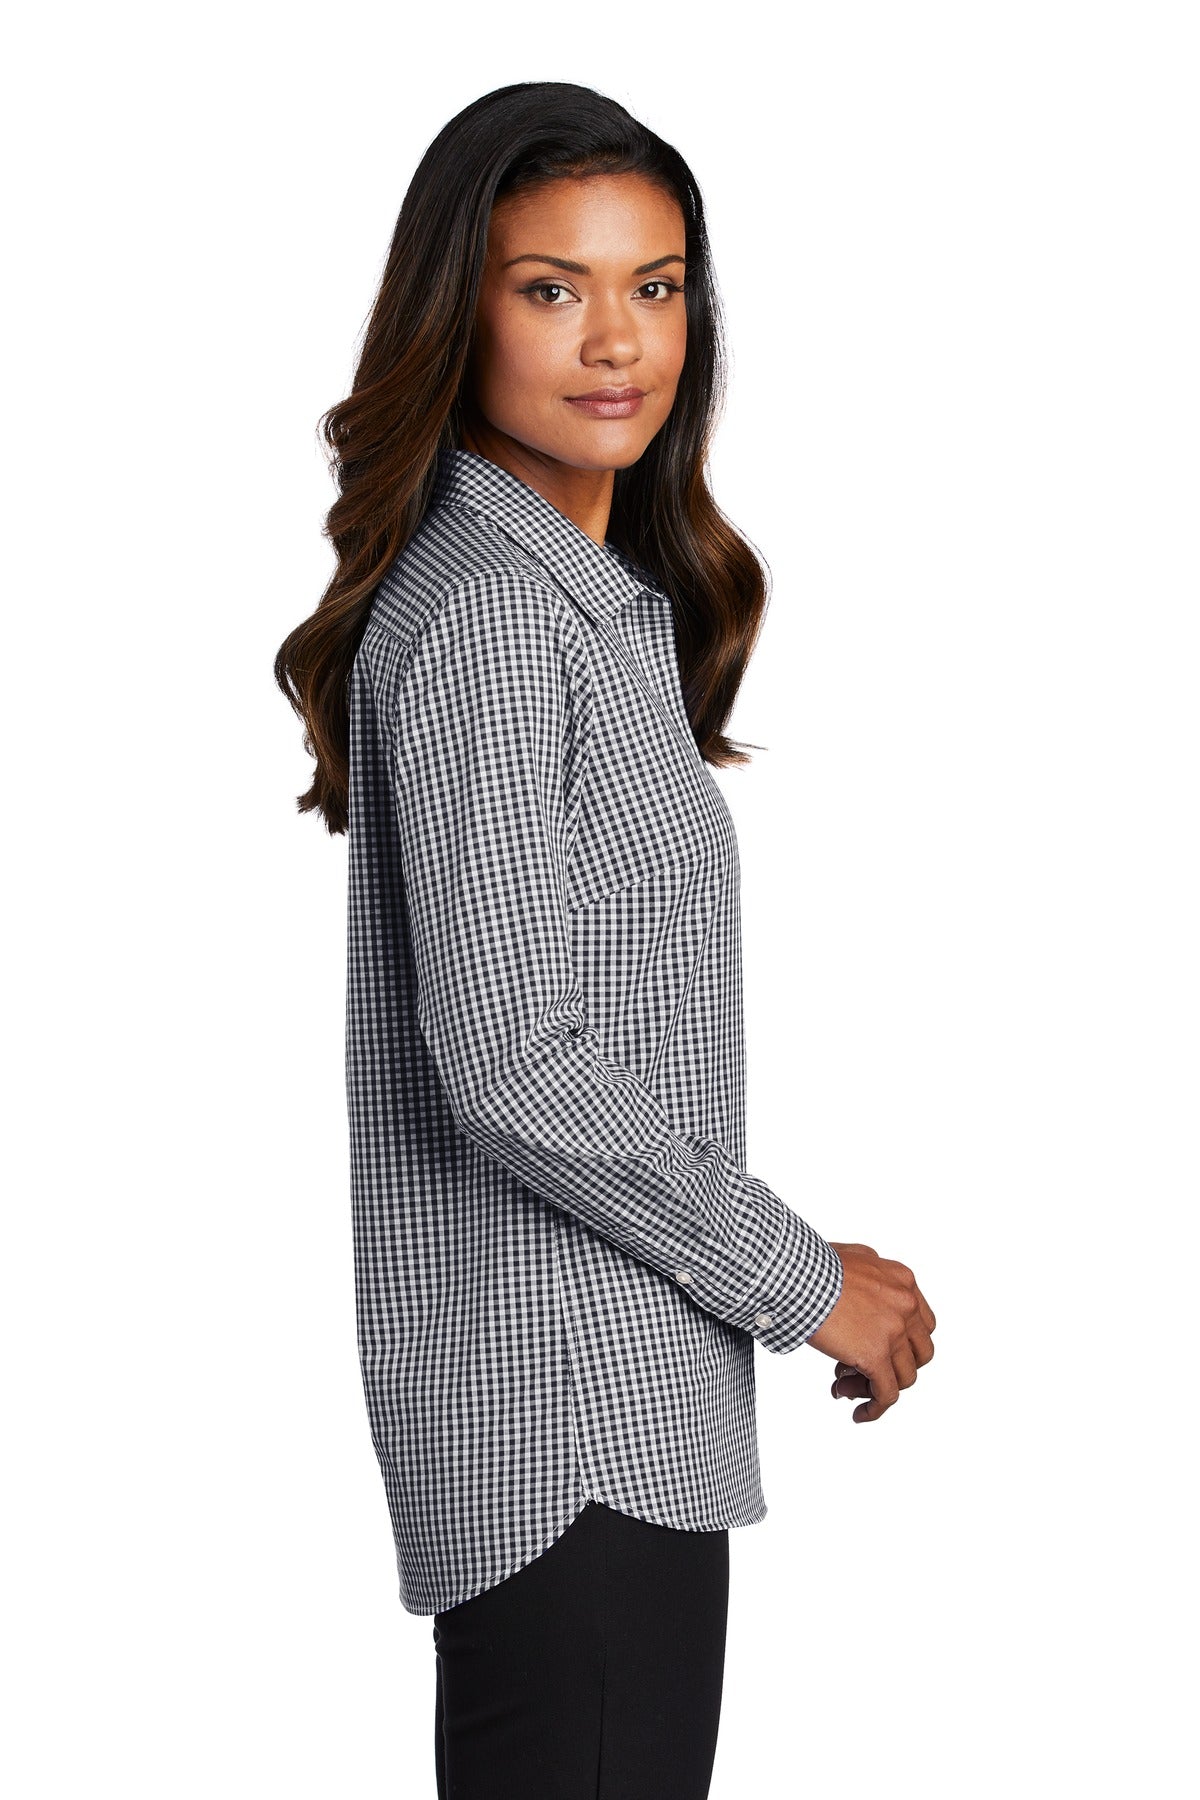 Port Authority ® Ladies Broadcloth Gingham Easy Care Shirt LW644 - DFW Impression